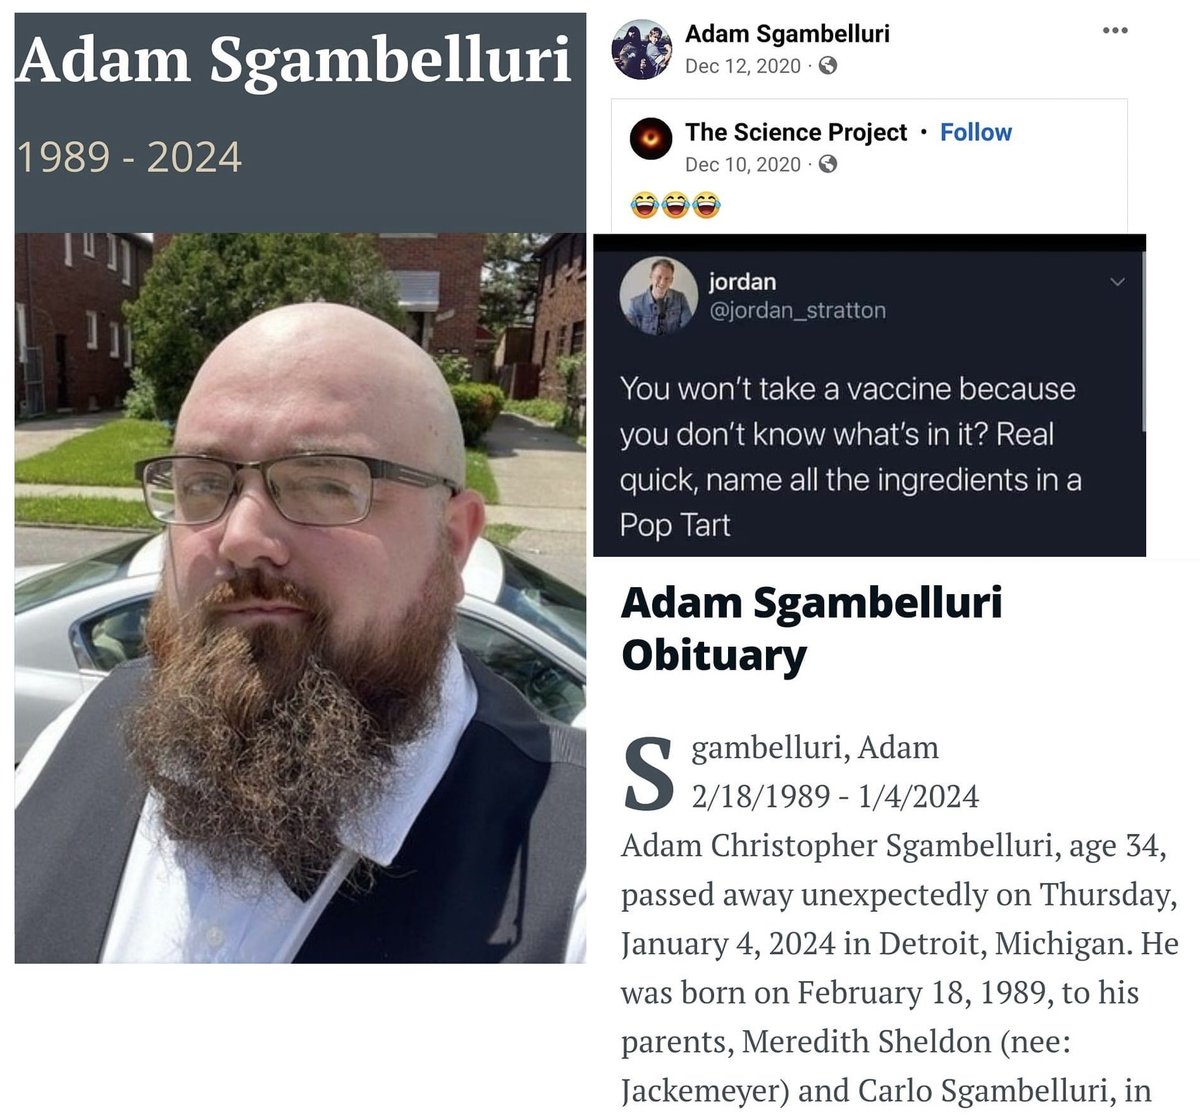 Detroit, MI - 34 year old Adam Christopher Sgambelluri died unexpectedly on Jan.4, 2024.

Dec.12, 2020: 'You won't take a vaccine because you don't know what's in it?' Real quick, name all the ingredients in a Pop Tart'

Avoiding the COVID-19 mRNA Vaccines was the safest (and